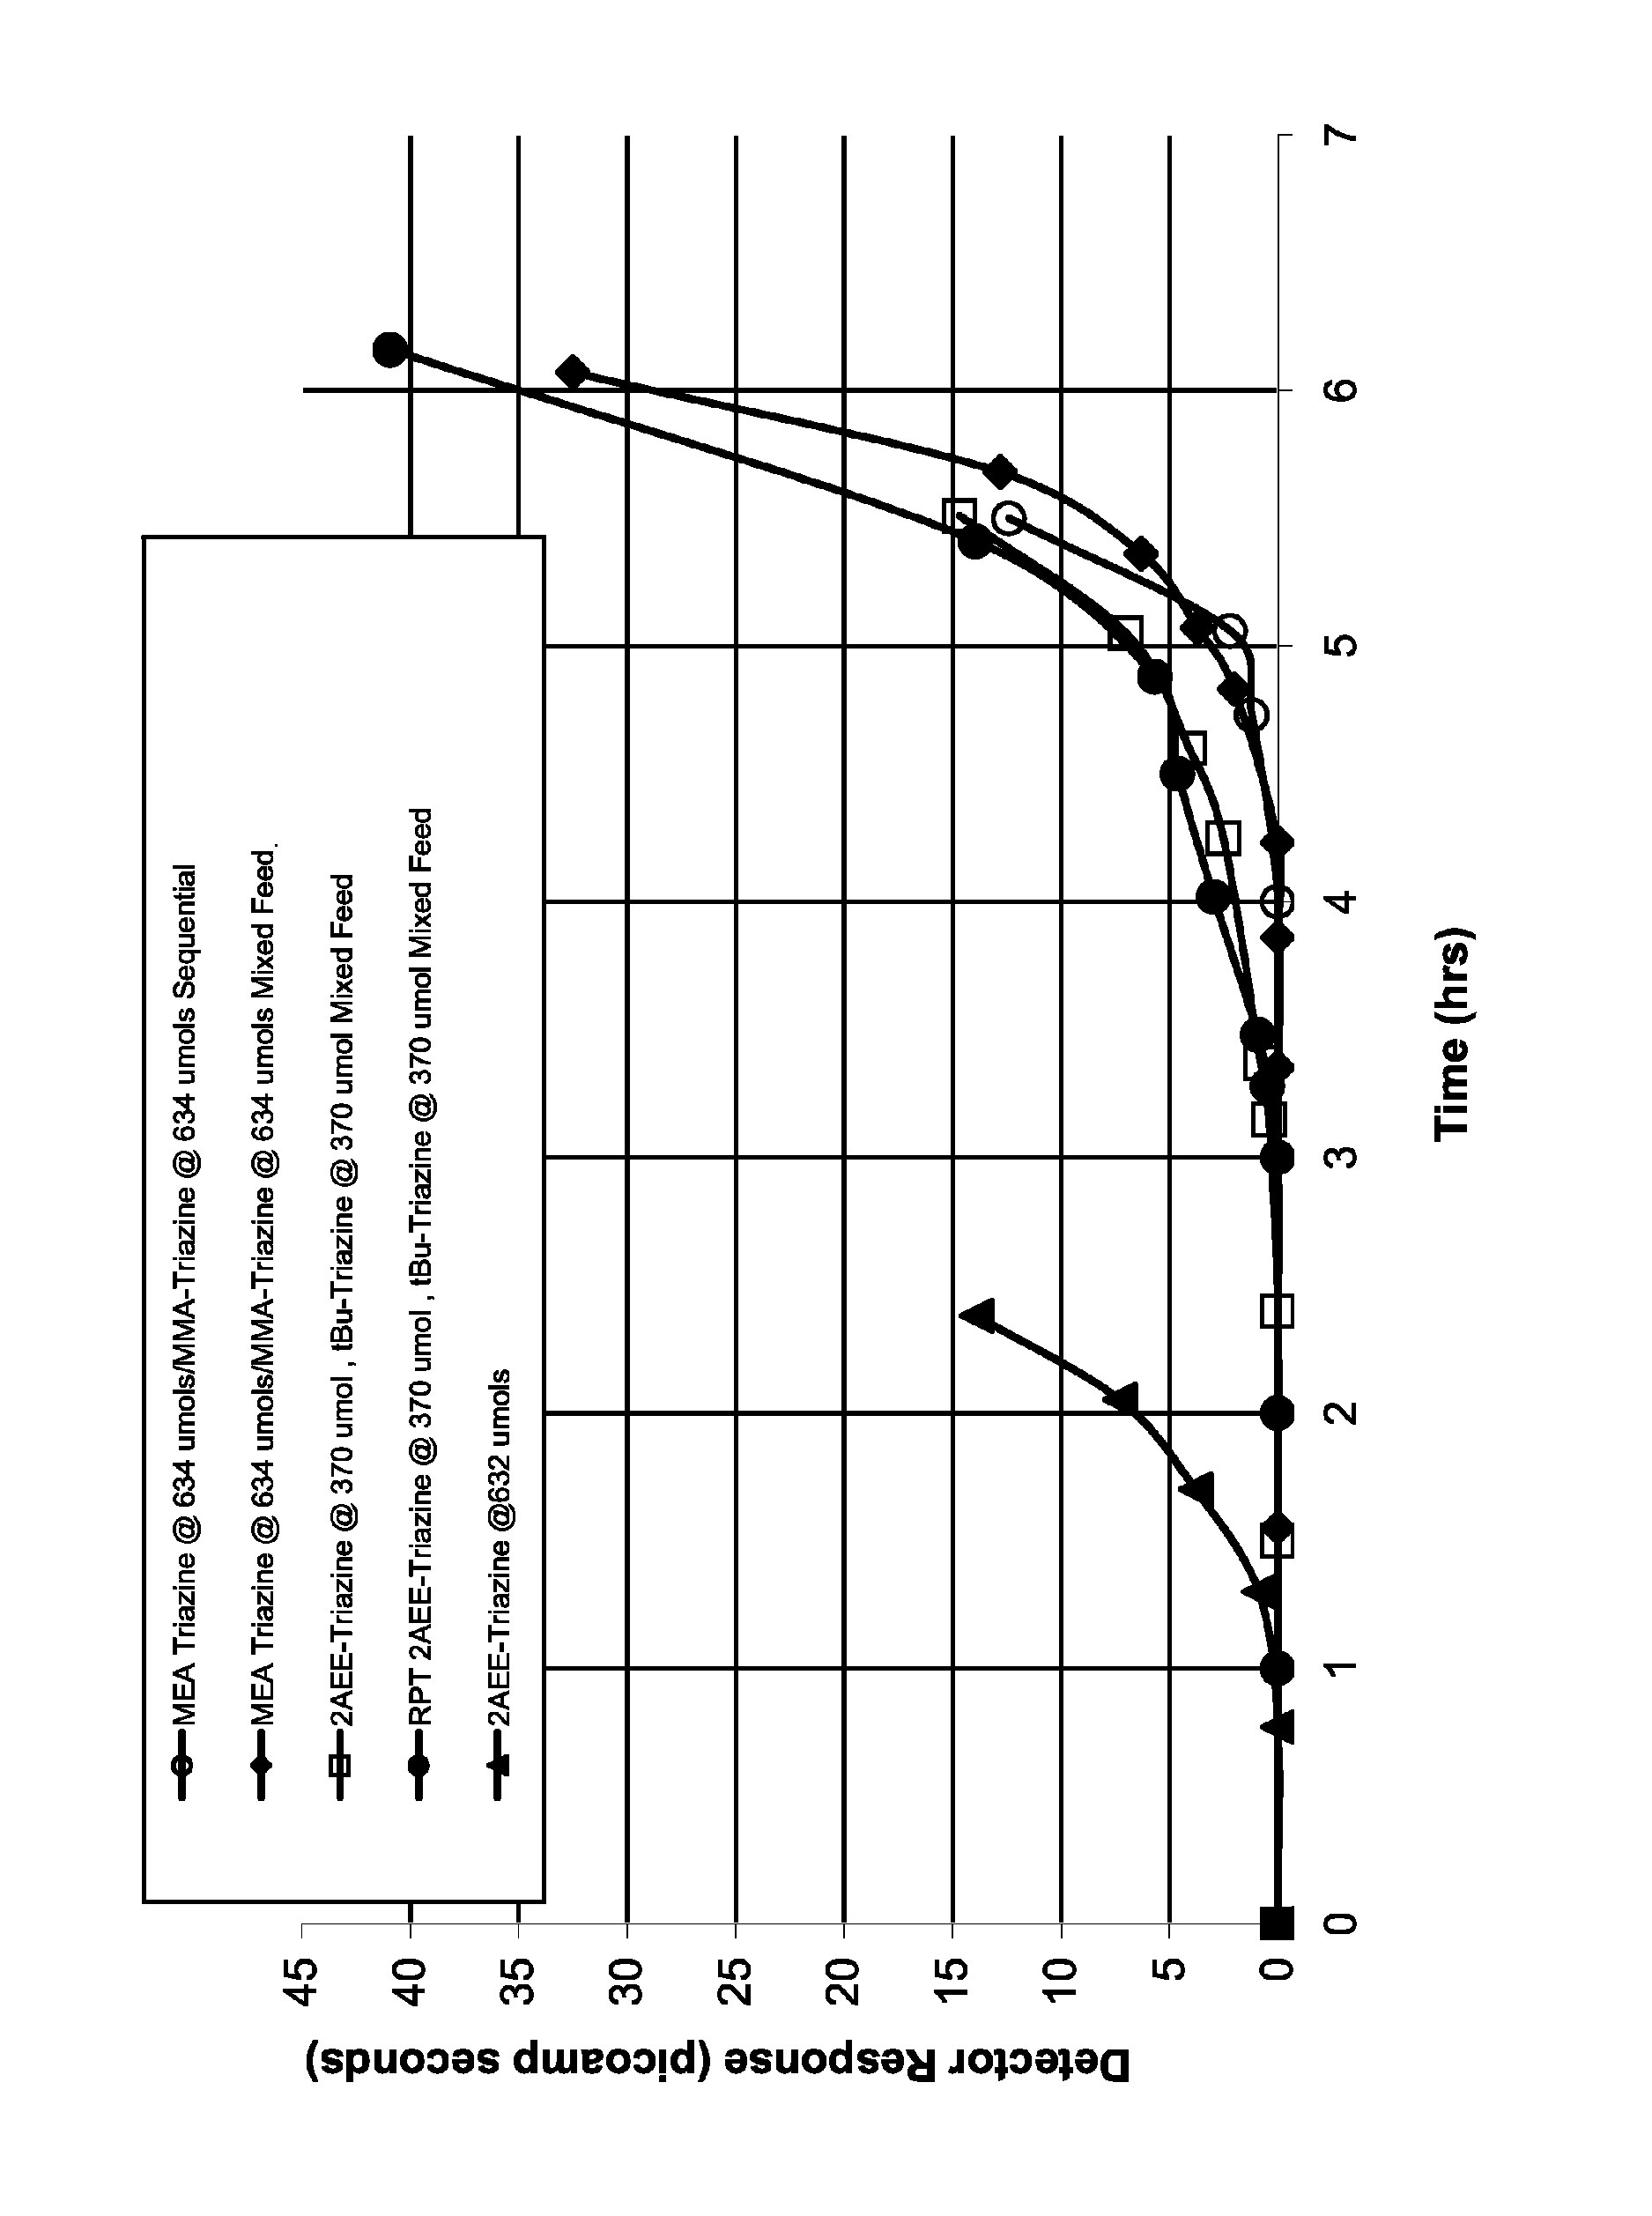 Method of scavenging hydrogen sulfide and/or mercaptans using triazines